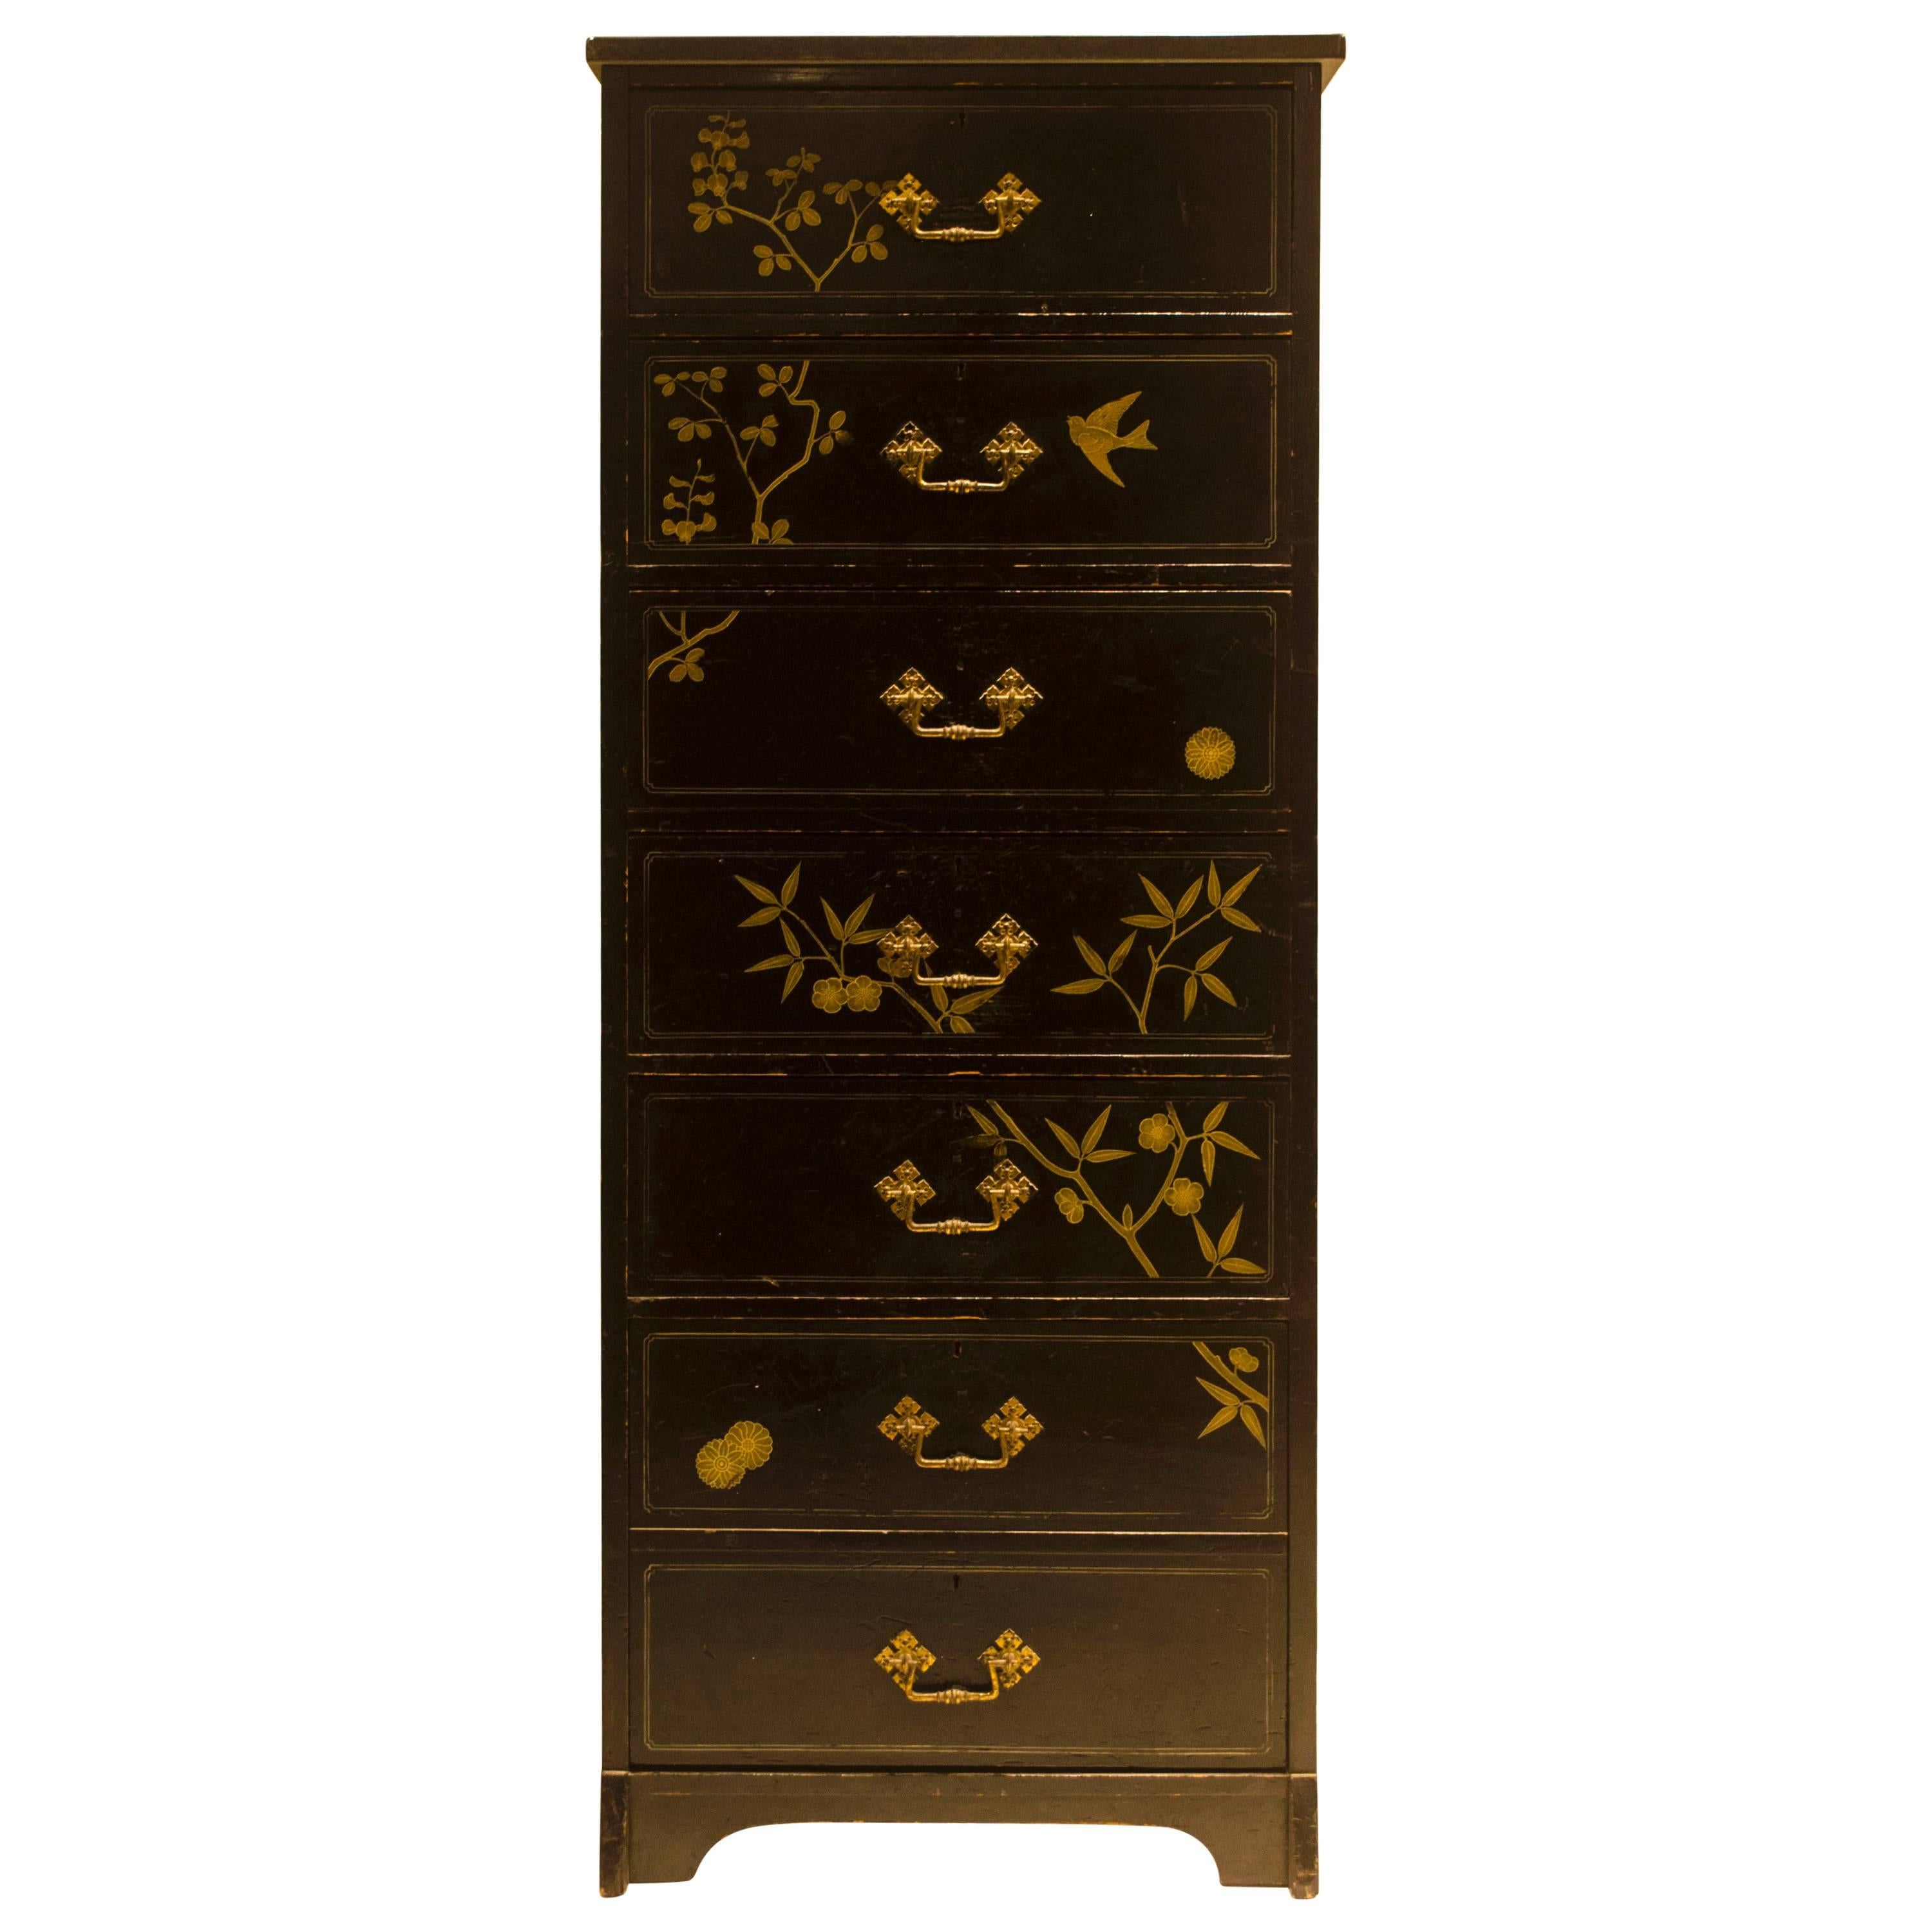 Daniel Cottier A Rare and Early Anglo-Japanese Ebonized Tall Chest of Drawers For Sale